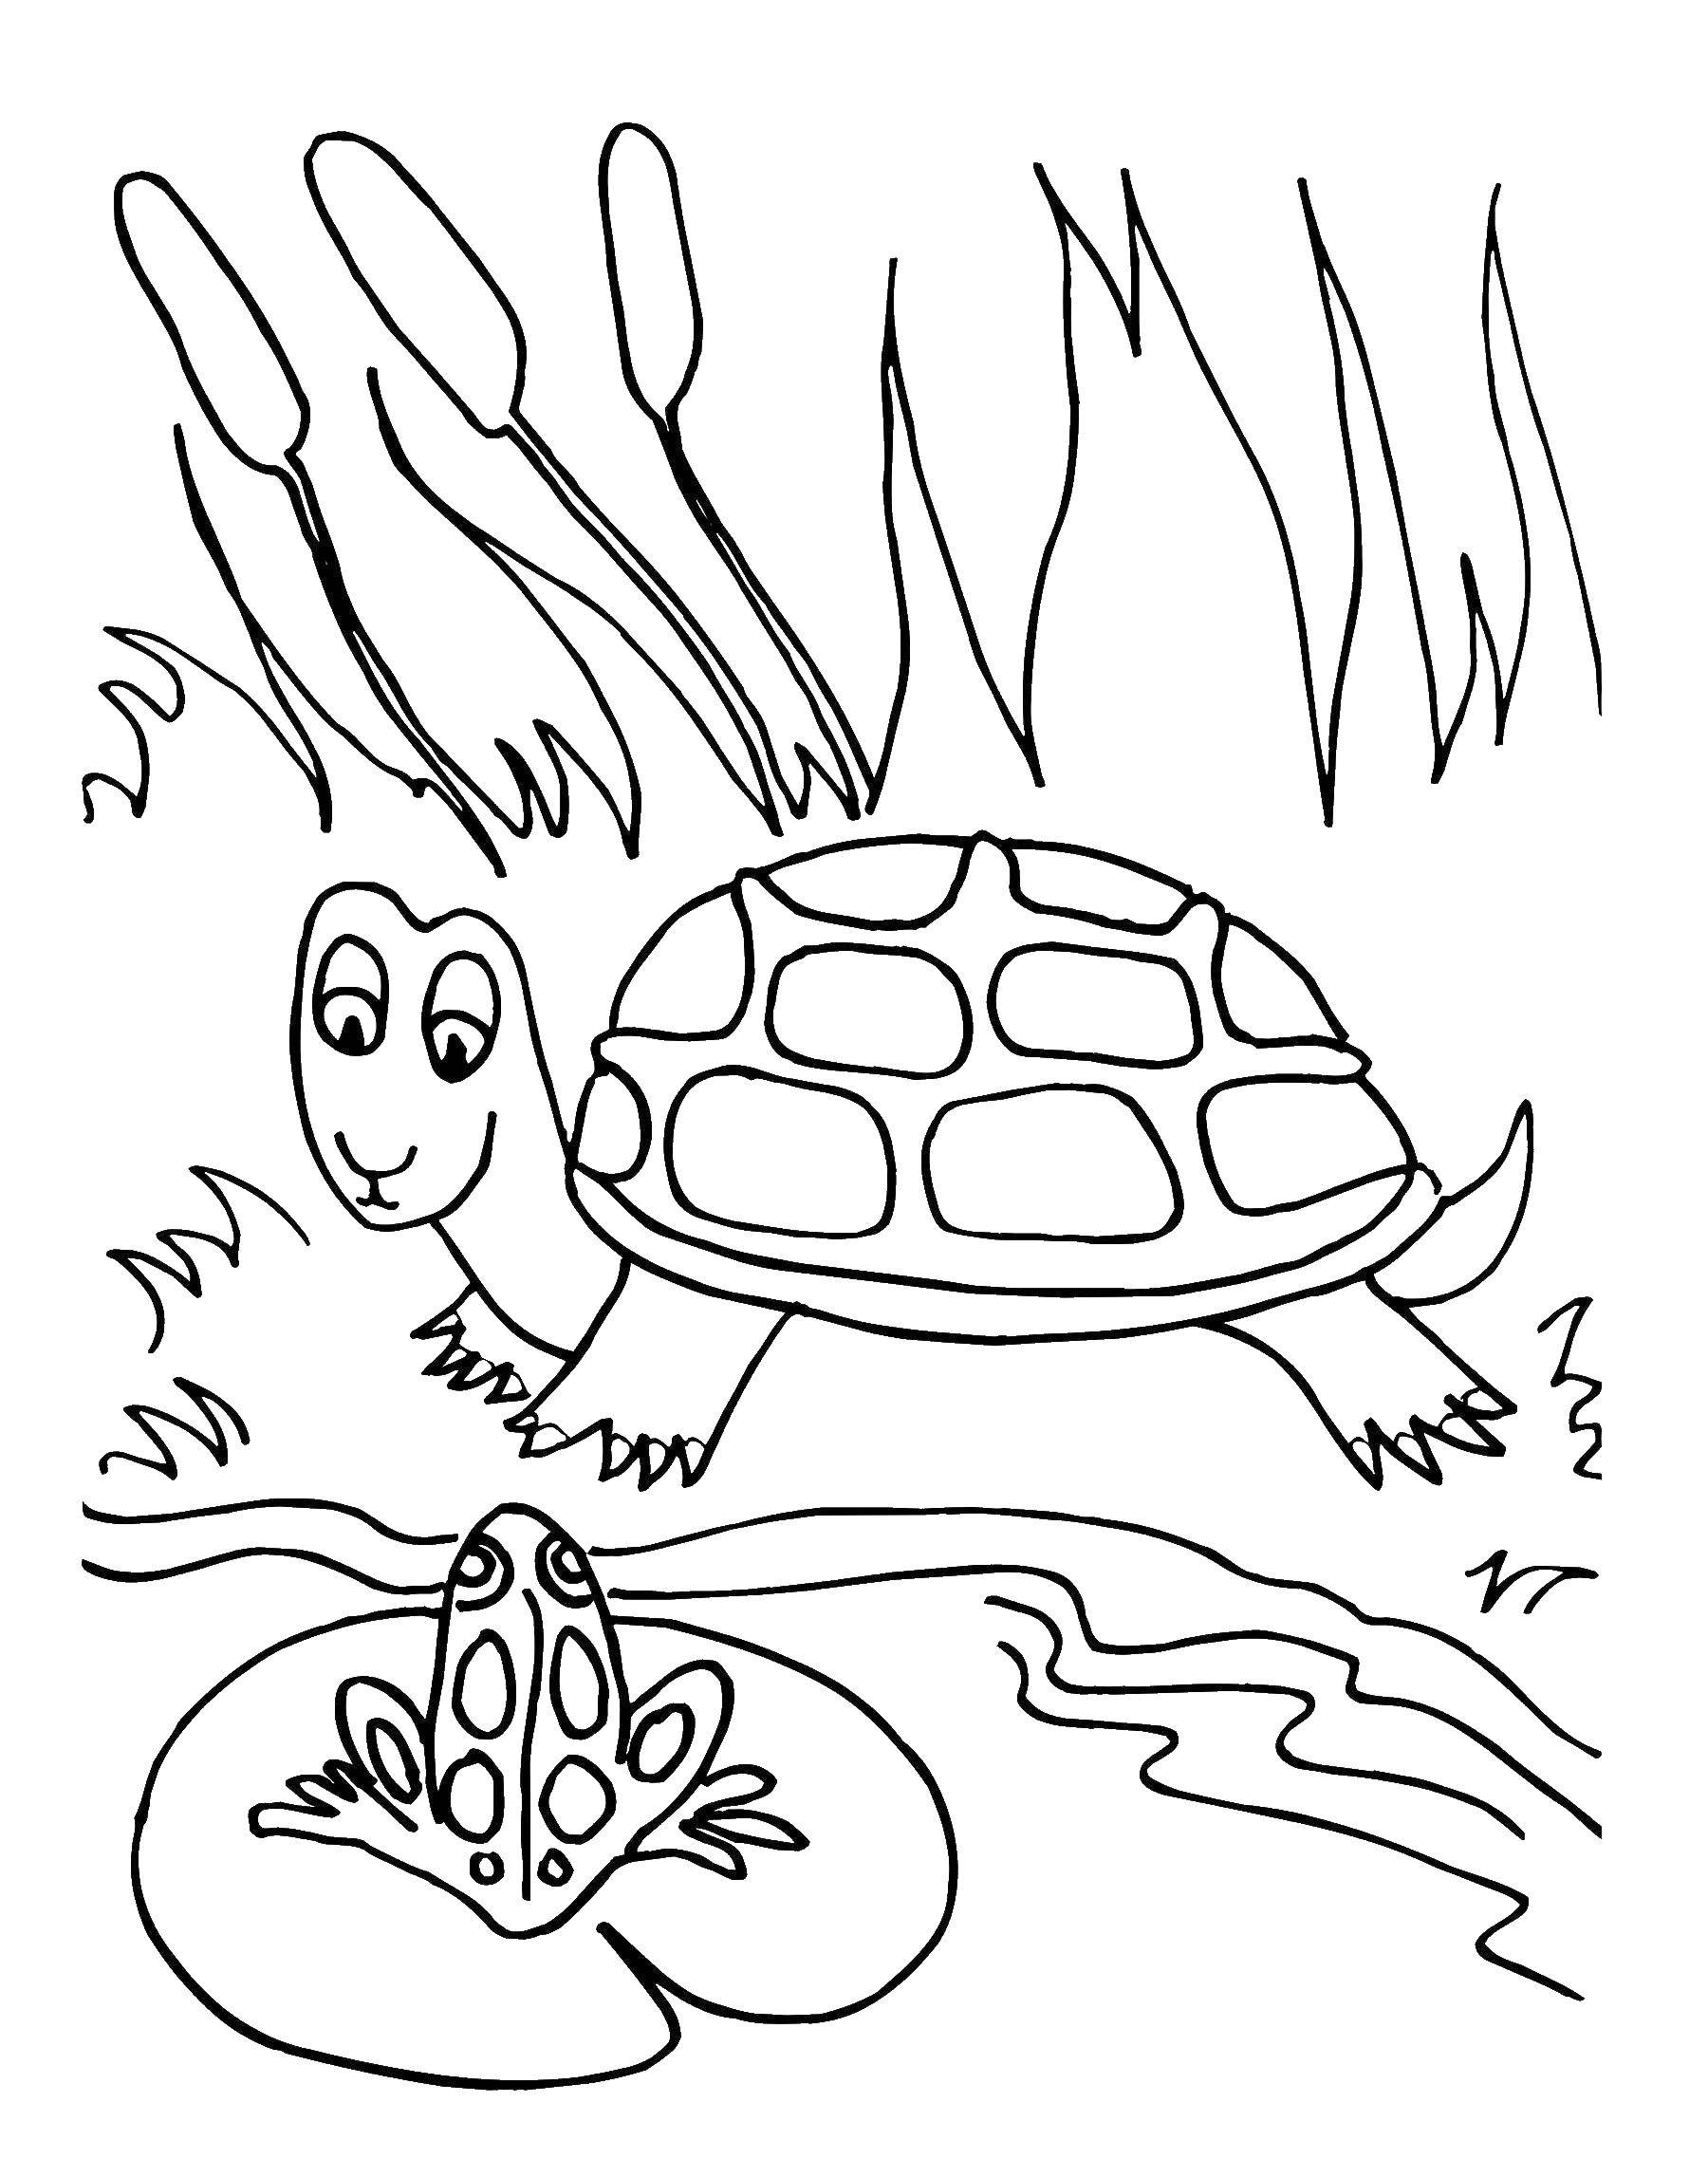 Coloring The turtle and the frog. Category reptiles. Tags:  Reptile, frog.